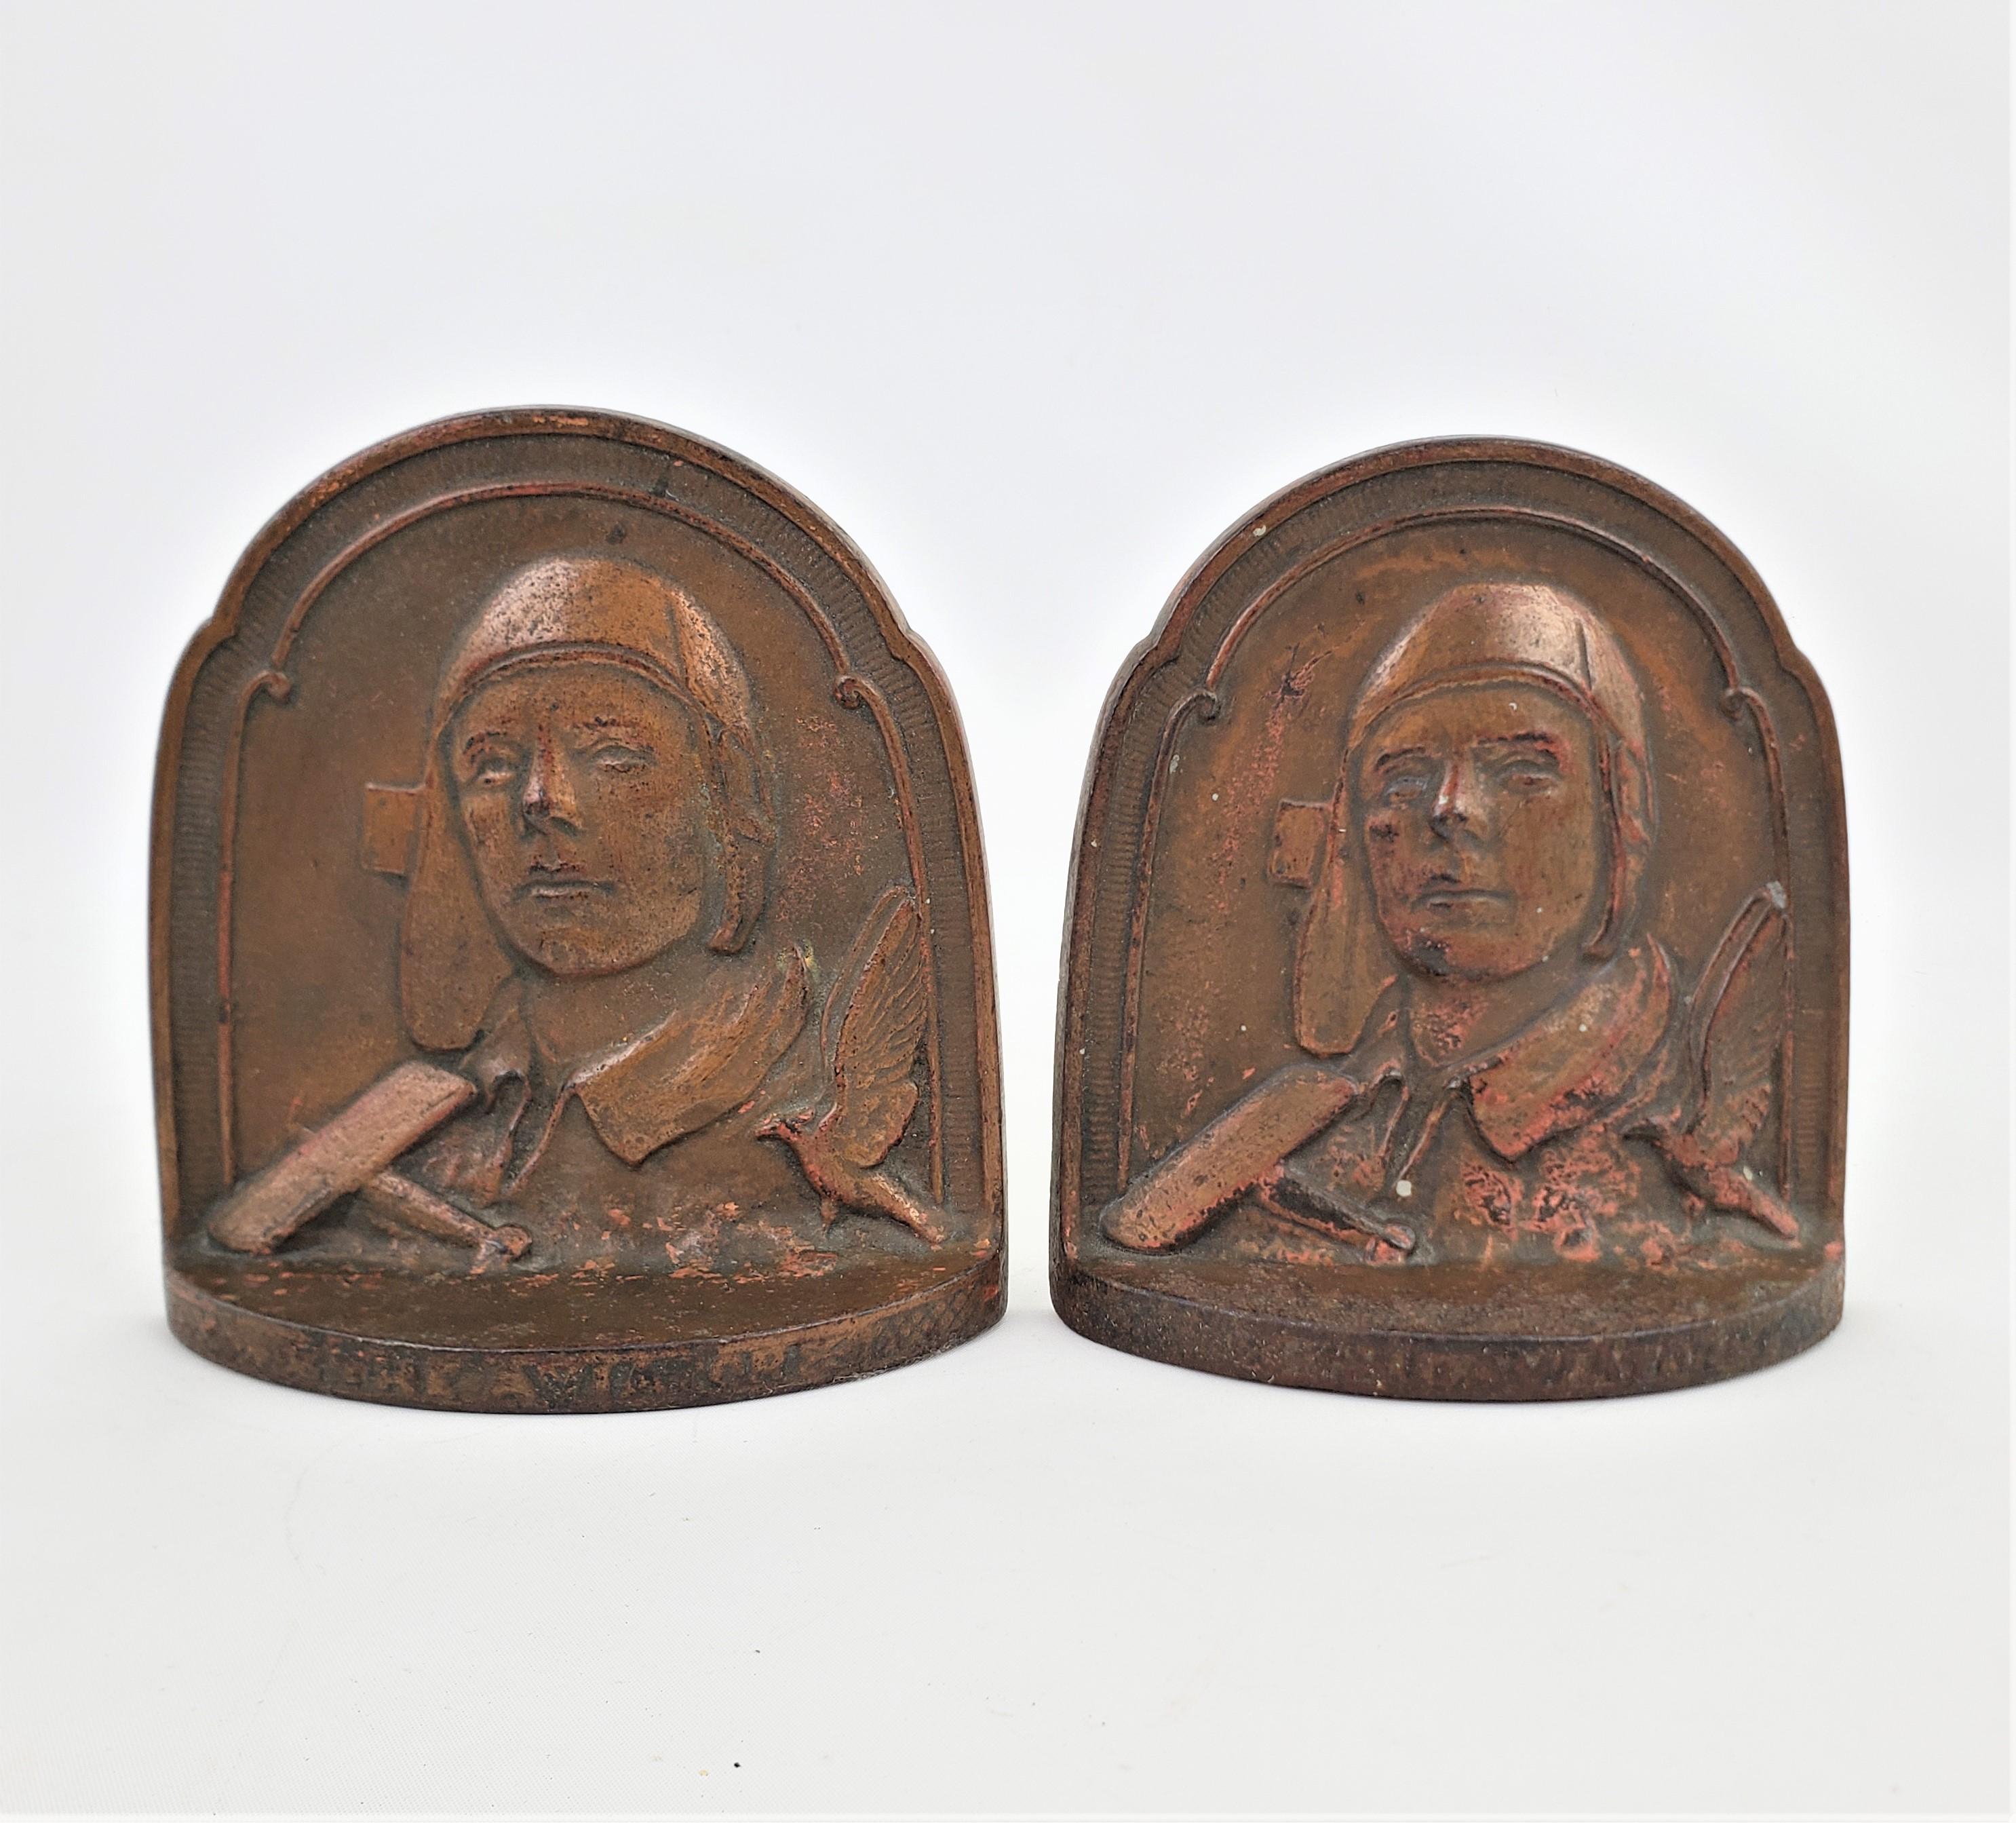 This set of cast and patinated bookends are signed by an unknown maker, but presumed to be early examples made by COPR of the United States during the 1920's in the period Art Deco style. The bookends show a relief depicting Charles Lindbergh with